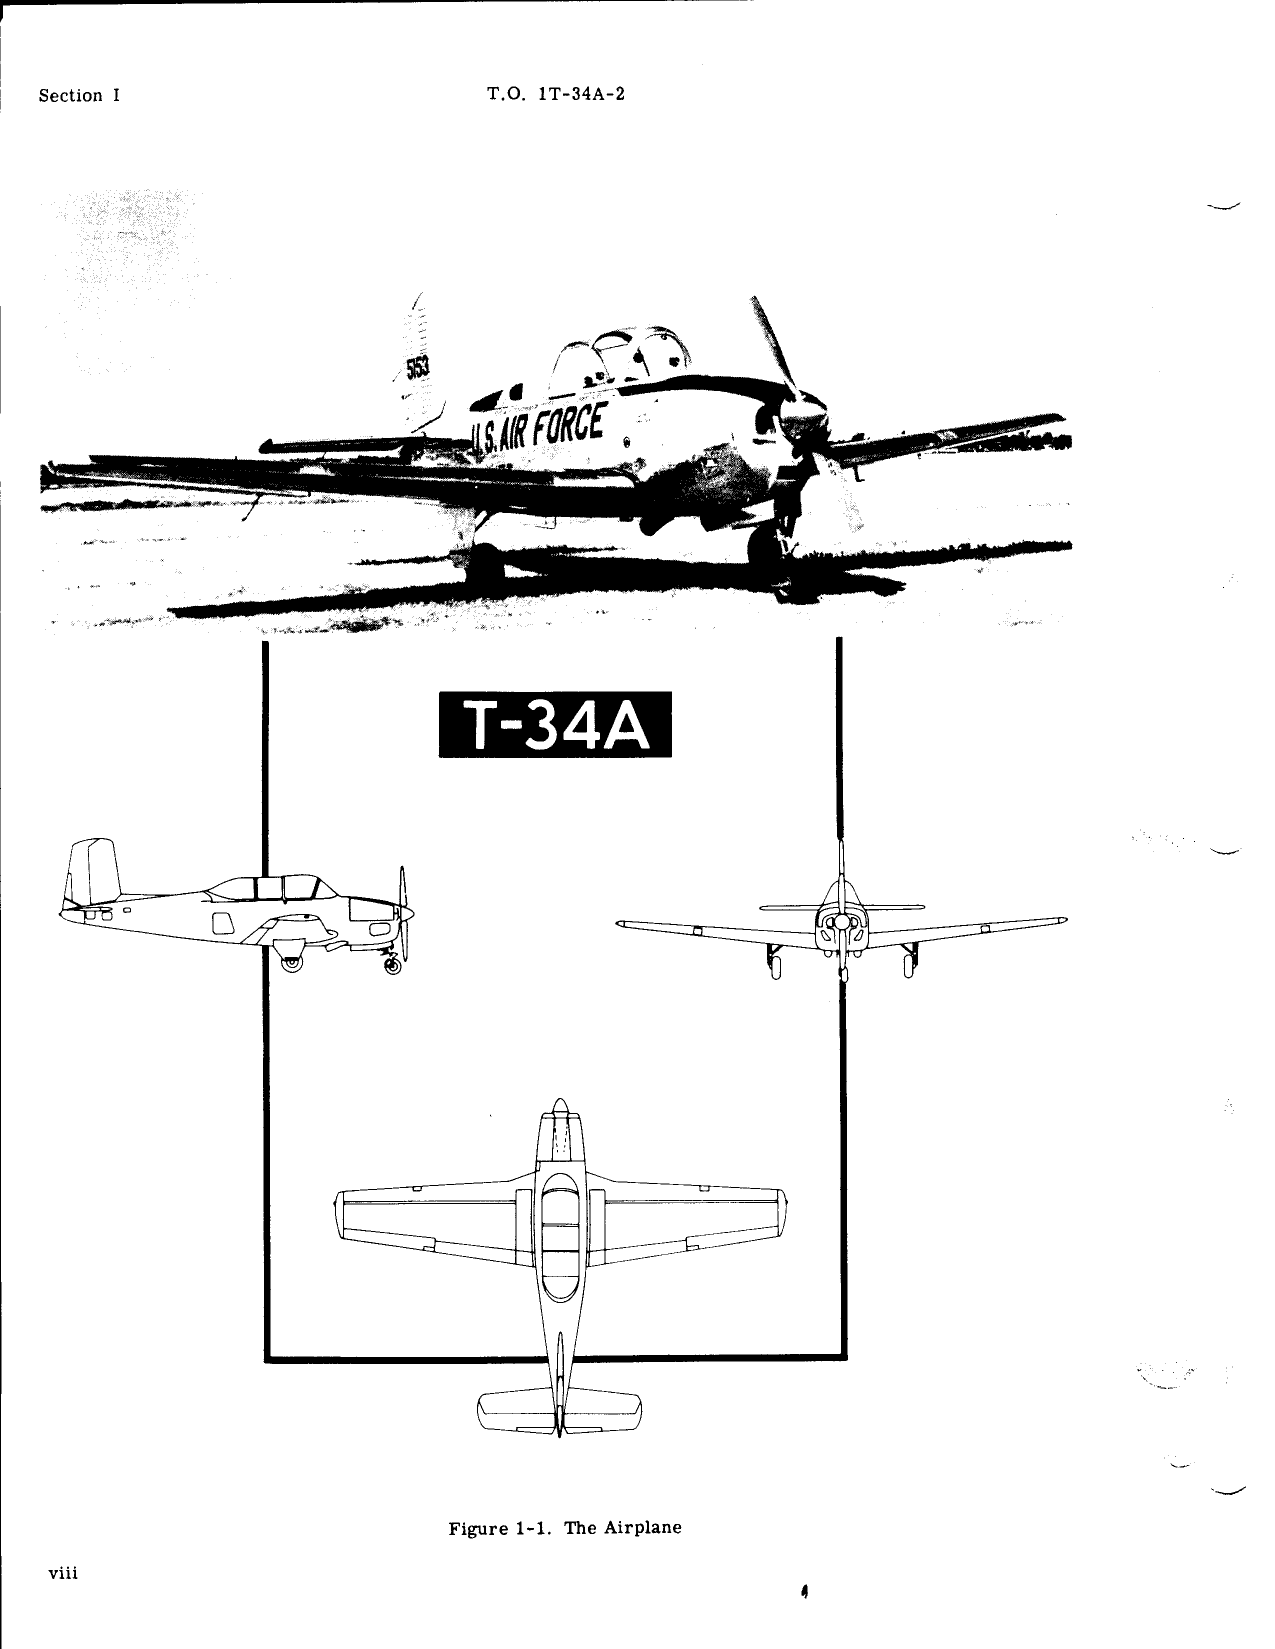 Sample page 12 from AirCorps Library document: Maintenance Manual for T-34A Aircraft